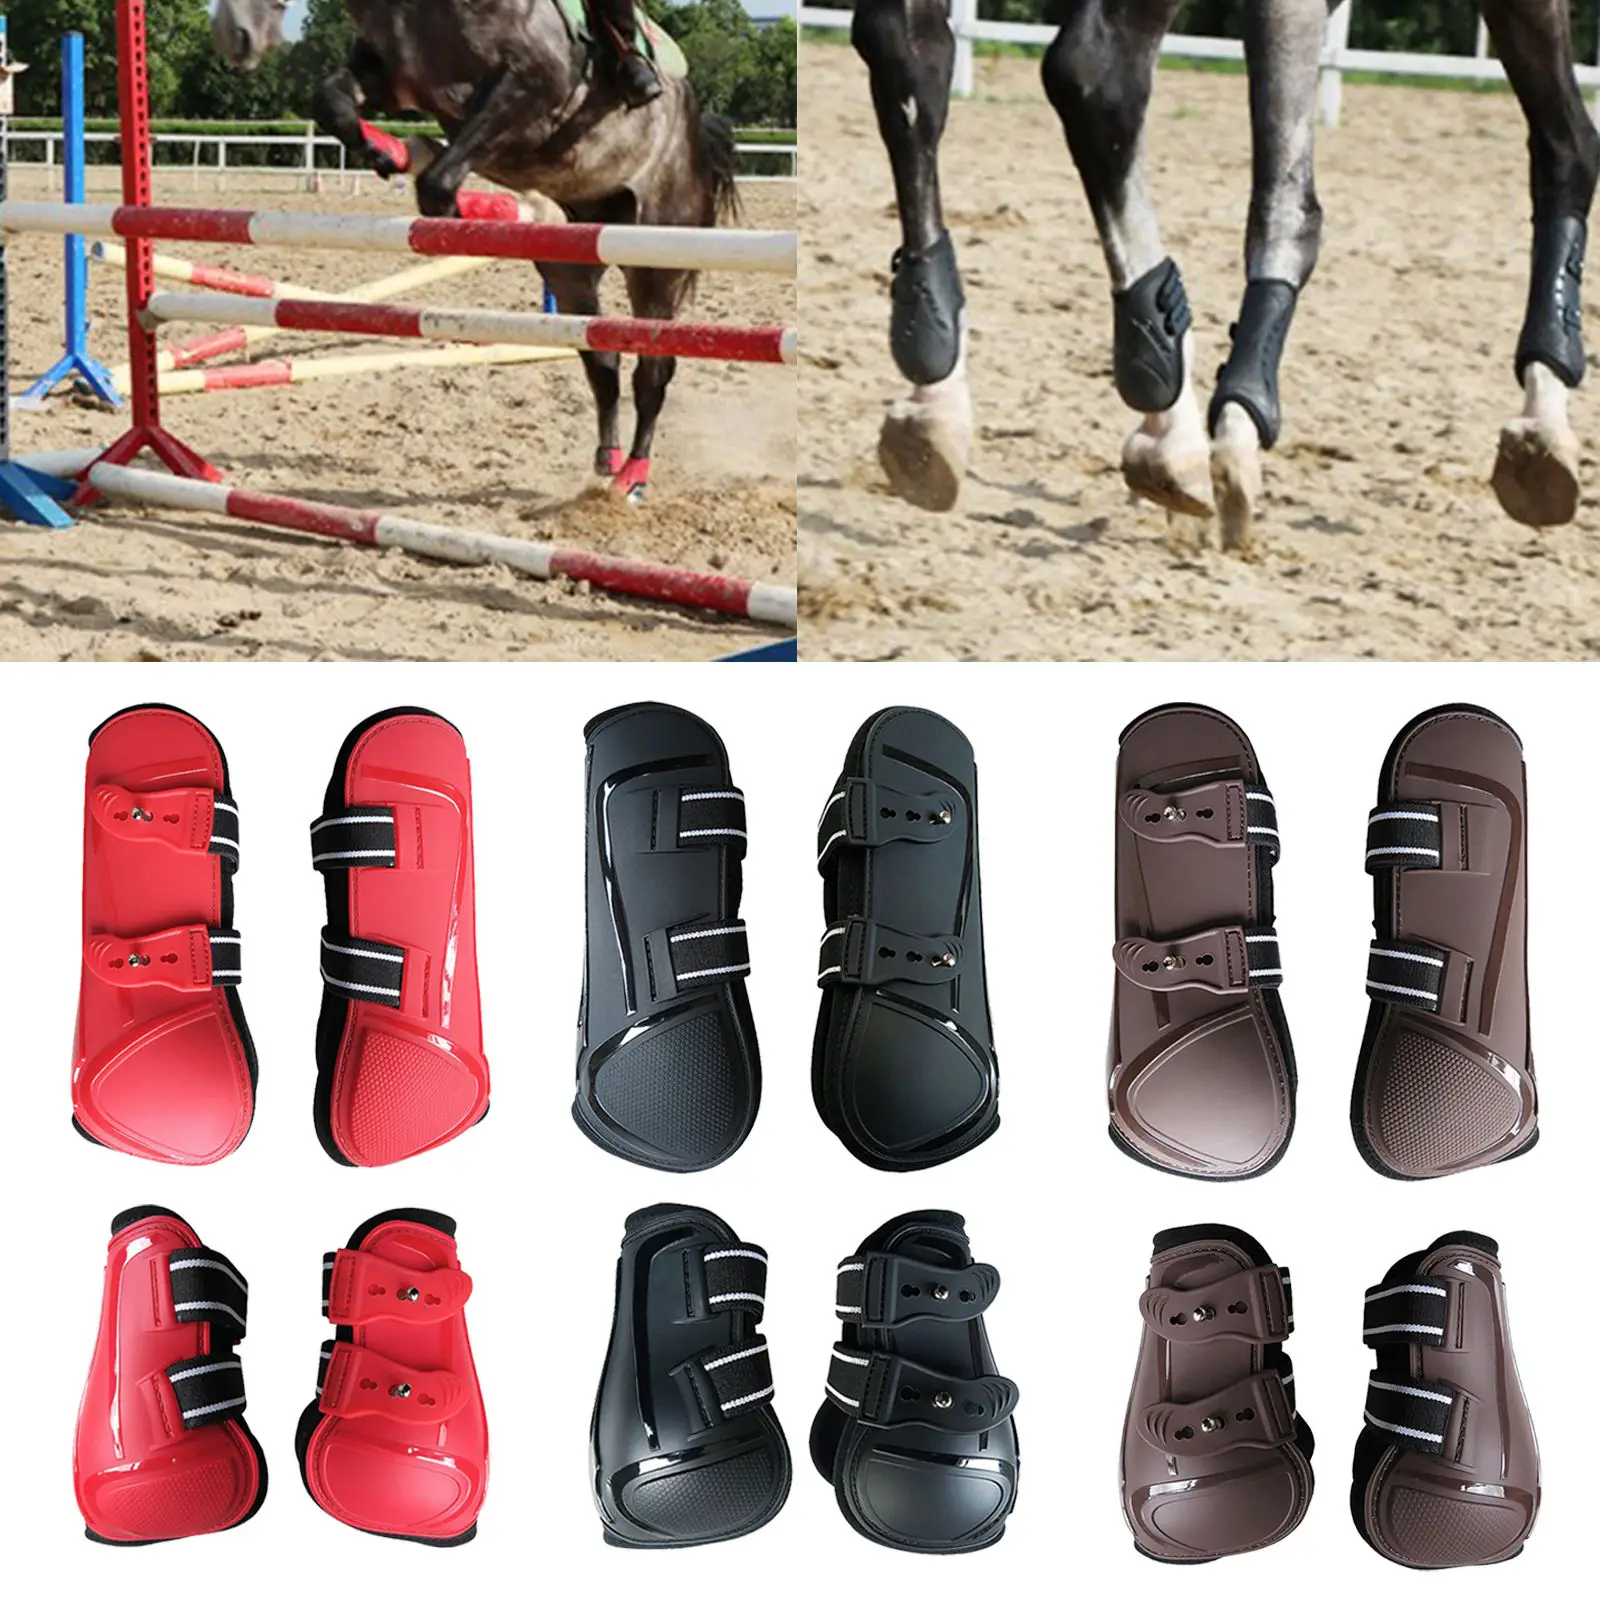 1 Pair Front/Hind Legs Jumping Tendon Horses Boots, Secure Leg Protection, Durable Dressage Horse Riding Equestrian Equipment